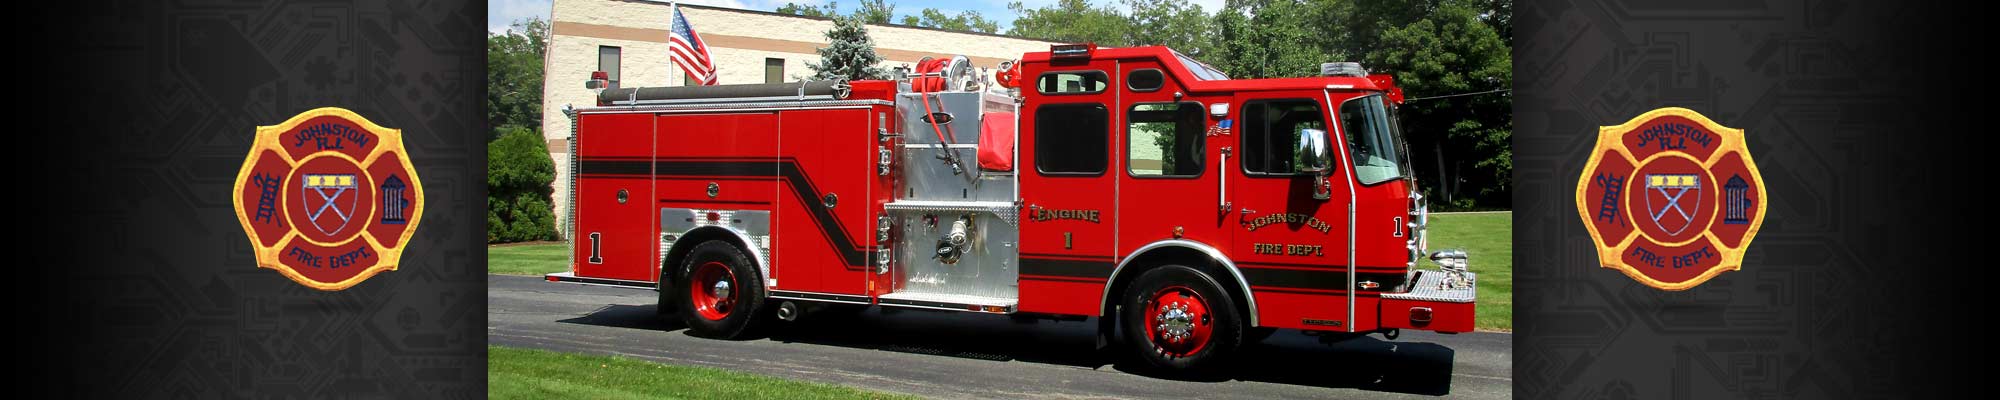 Town of Johnston Fire Department Case Study